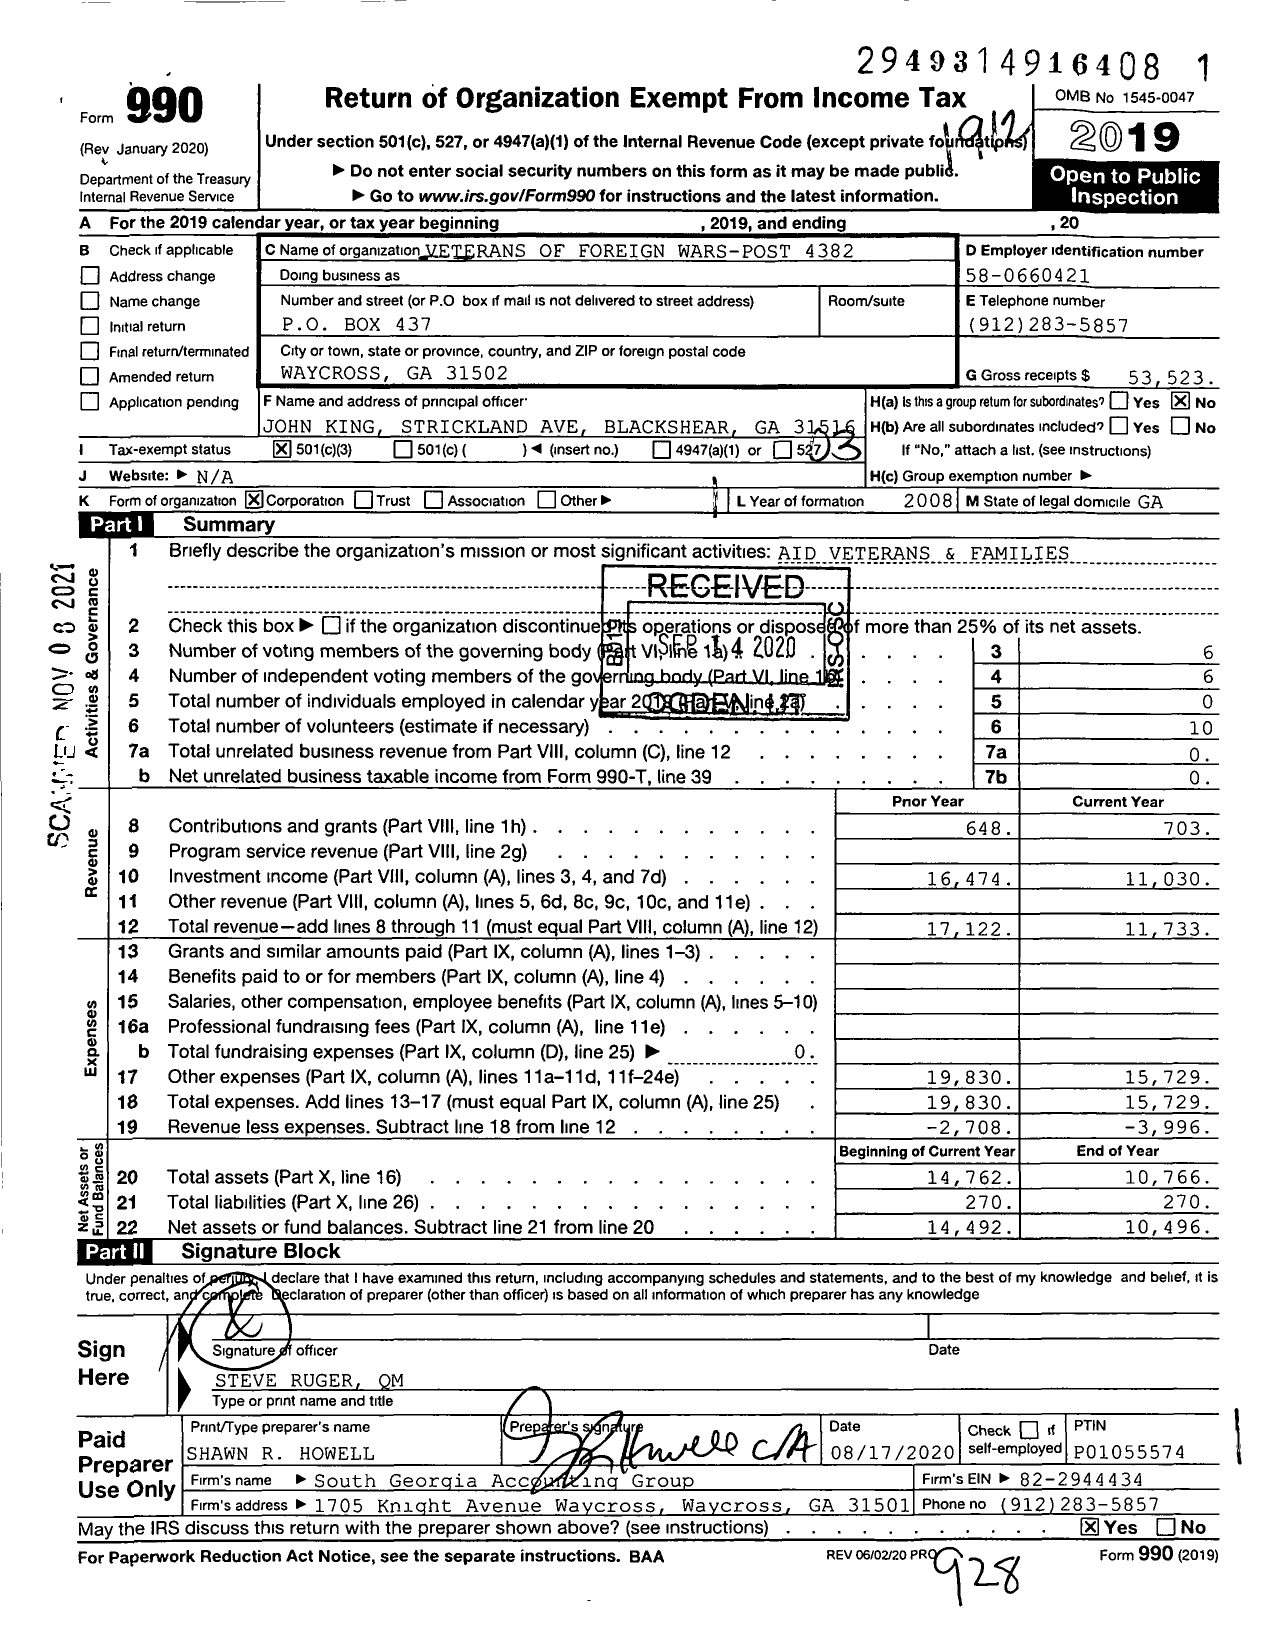 Image of first page of 2019 Form 990 for Veterans of Foreign Wars of the United States Dept of Georgia - 4382 VFW Ga